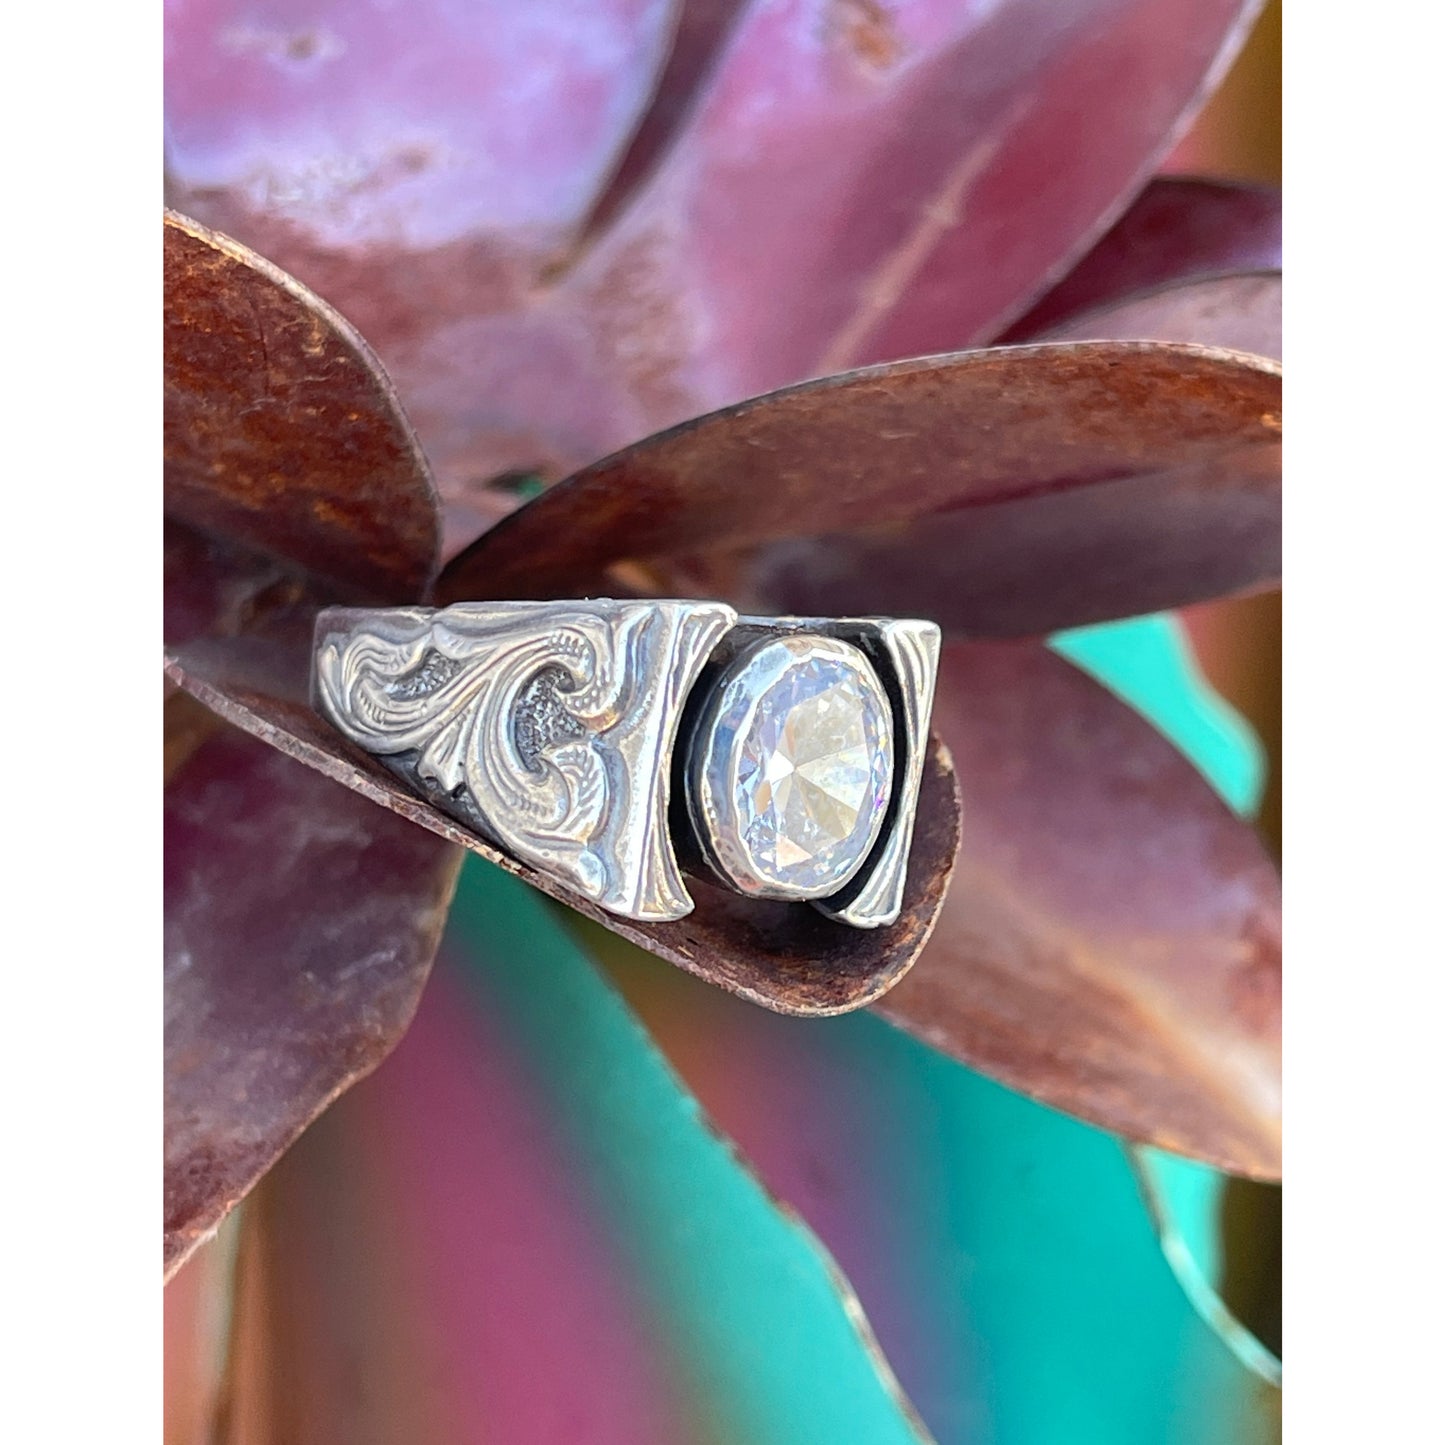  beautiful heavy sterling silver cathedral ring with overlaid bank note scrolls on each side of the ring with a 8mm x 10mm bezel set cubic zirconia.   